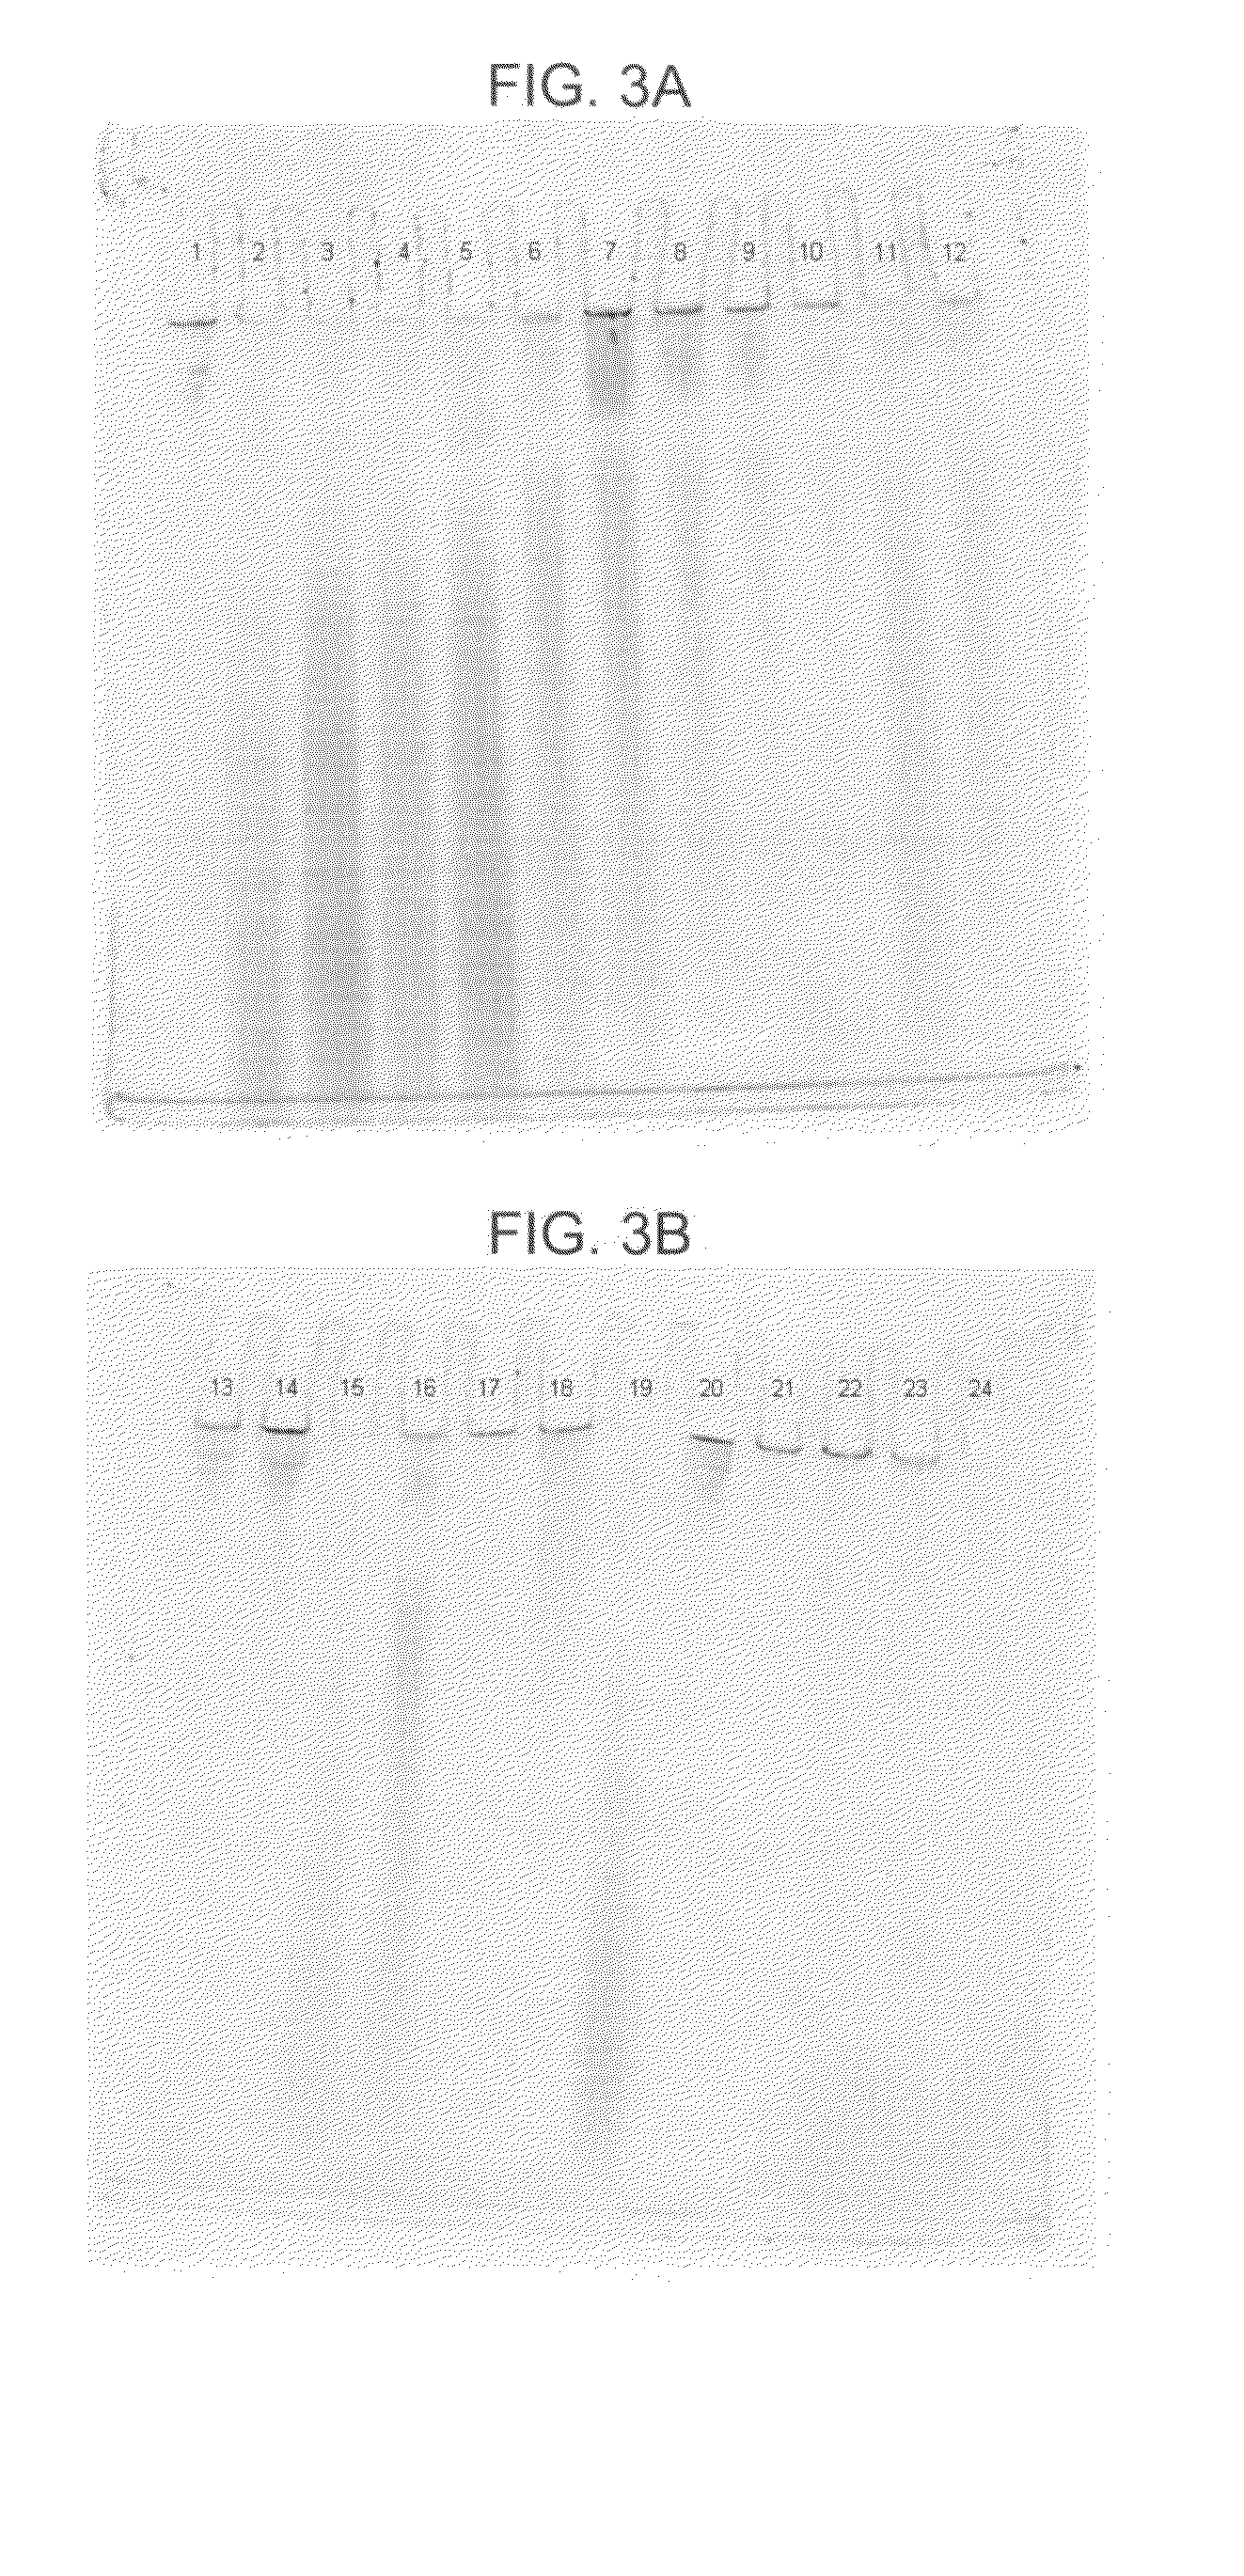 Methods of purifying a nucleic acid and formulation and kit for use in performing such methods